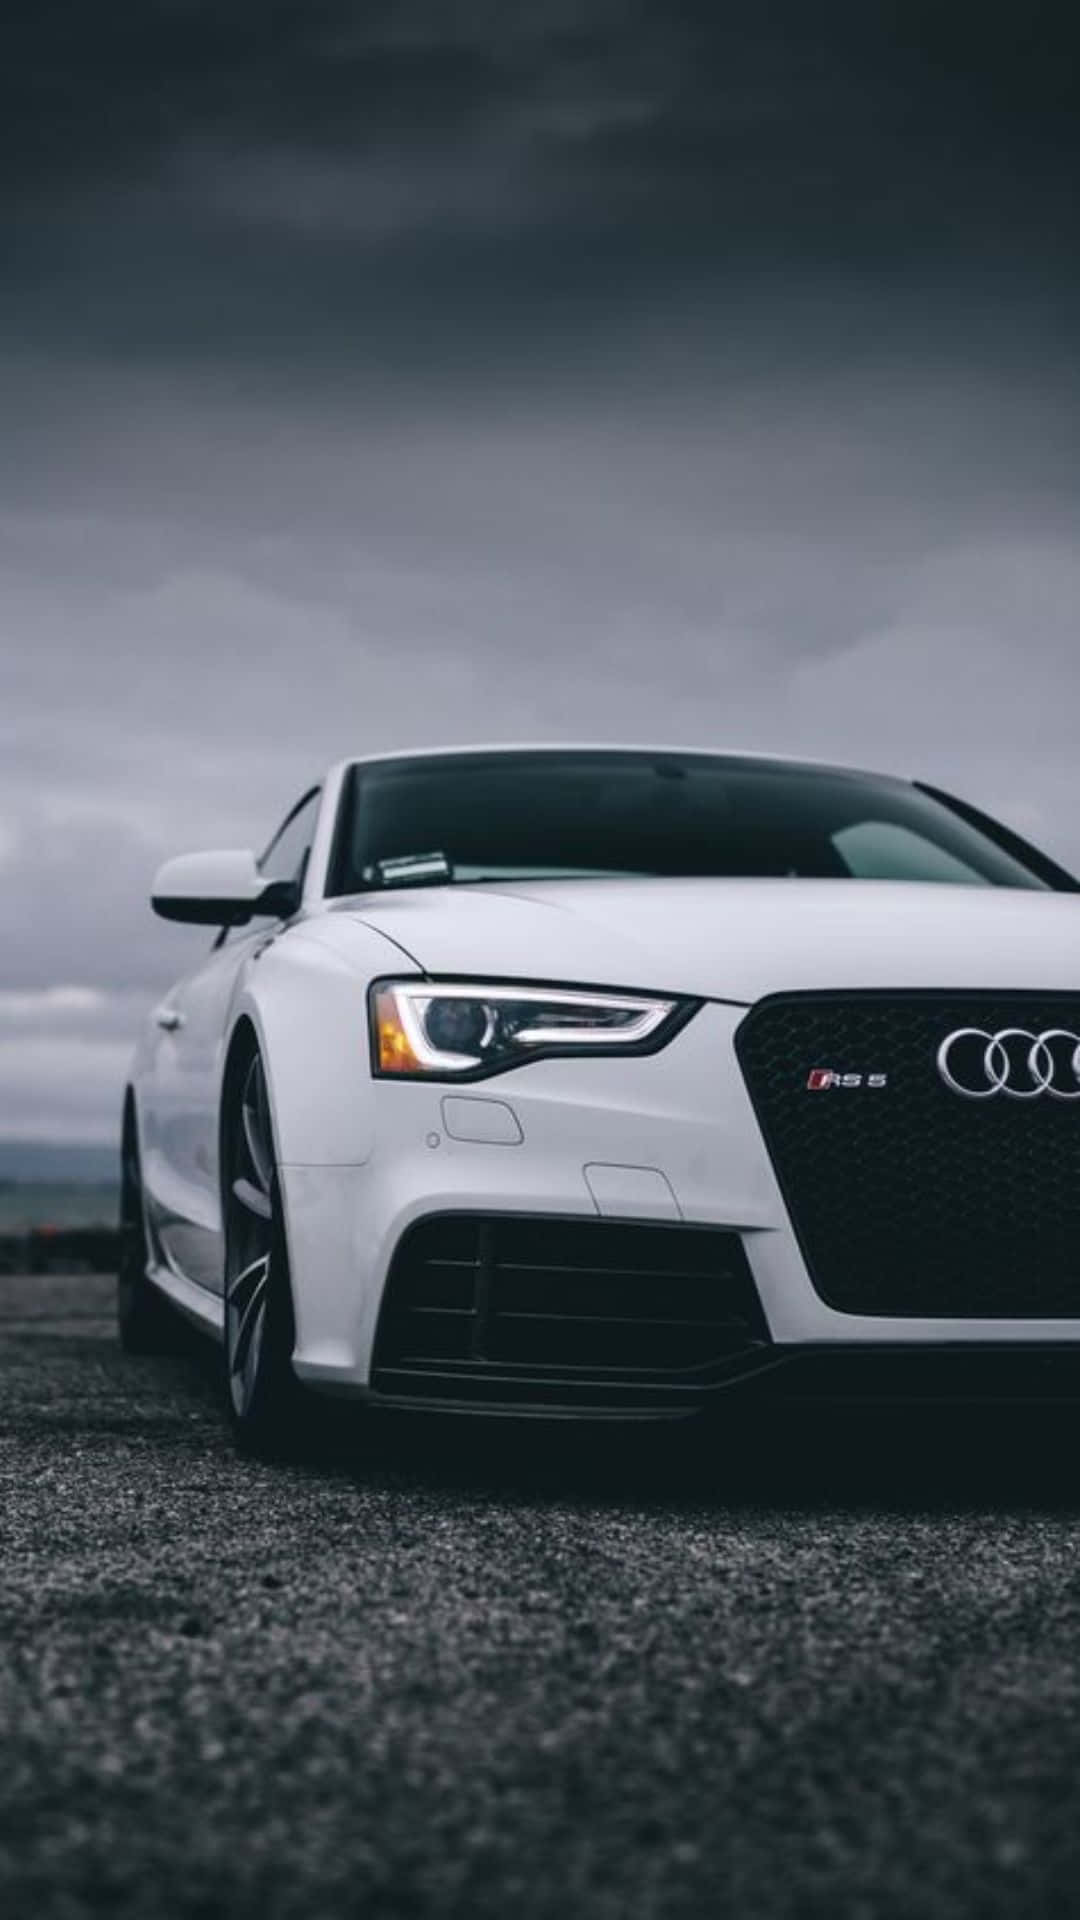 Free Audi Iphone Wallpaper Downloads, [100+] Audi Iphone Wallpapers for  FREE 